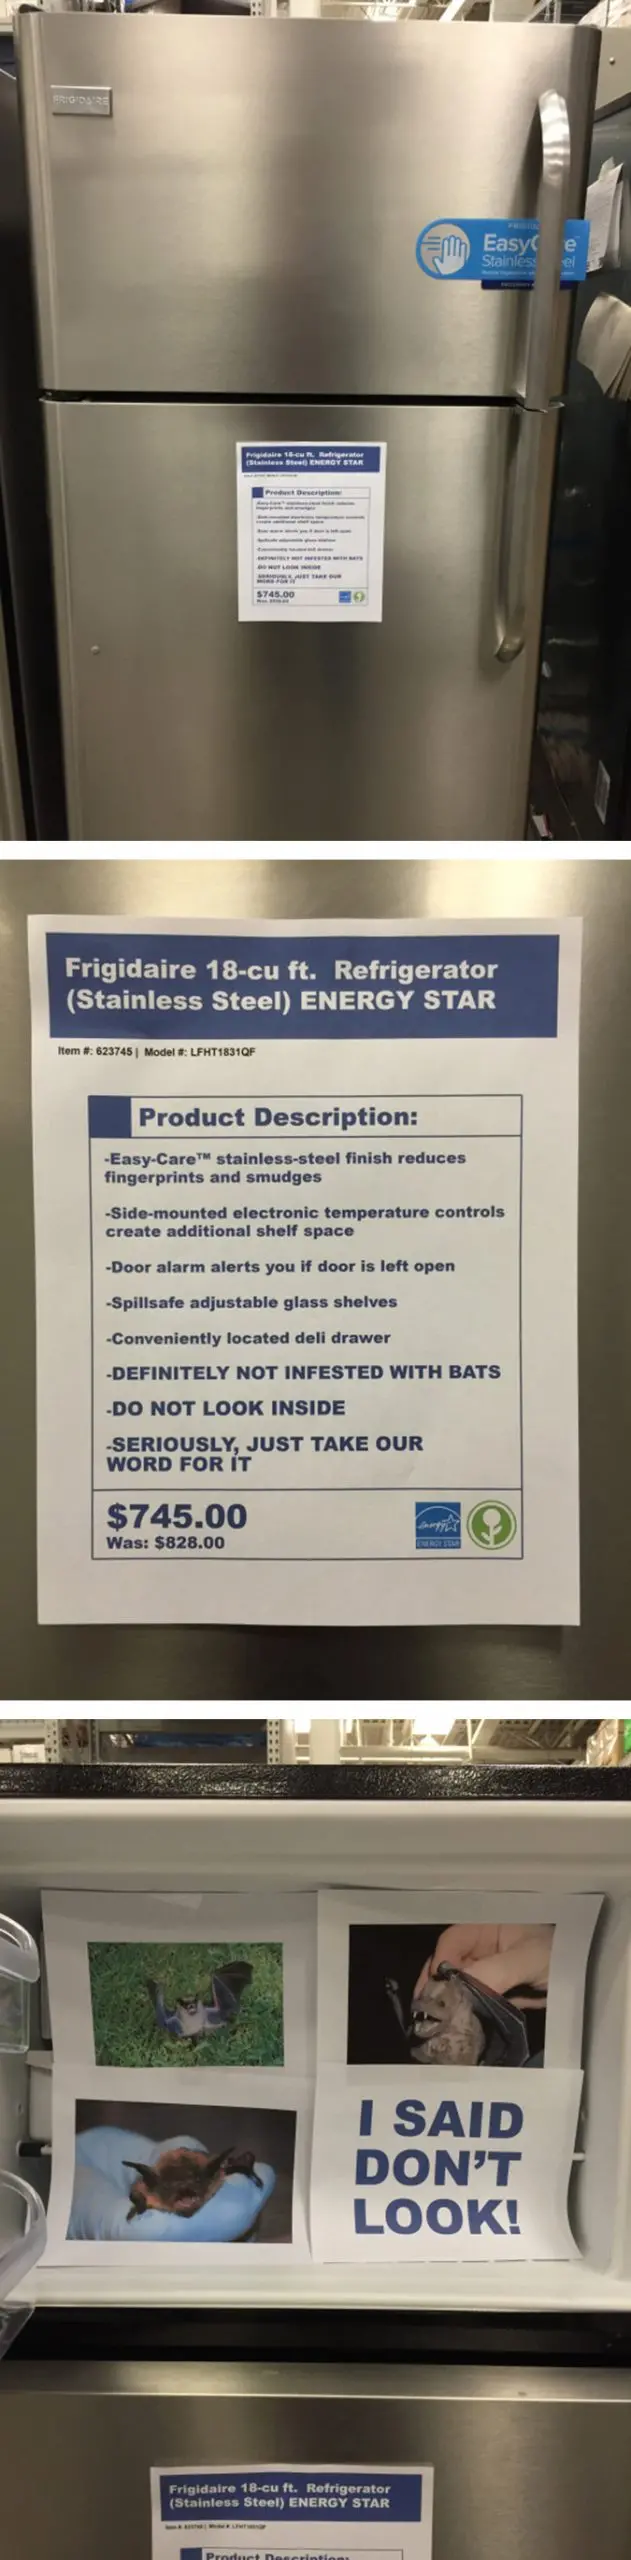 appliance store employees post hilarious signs on a fridge